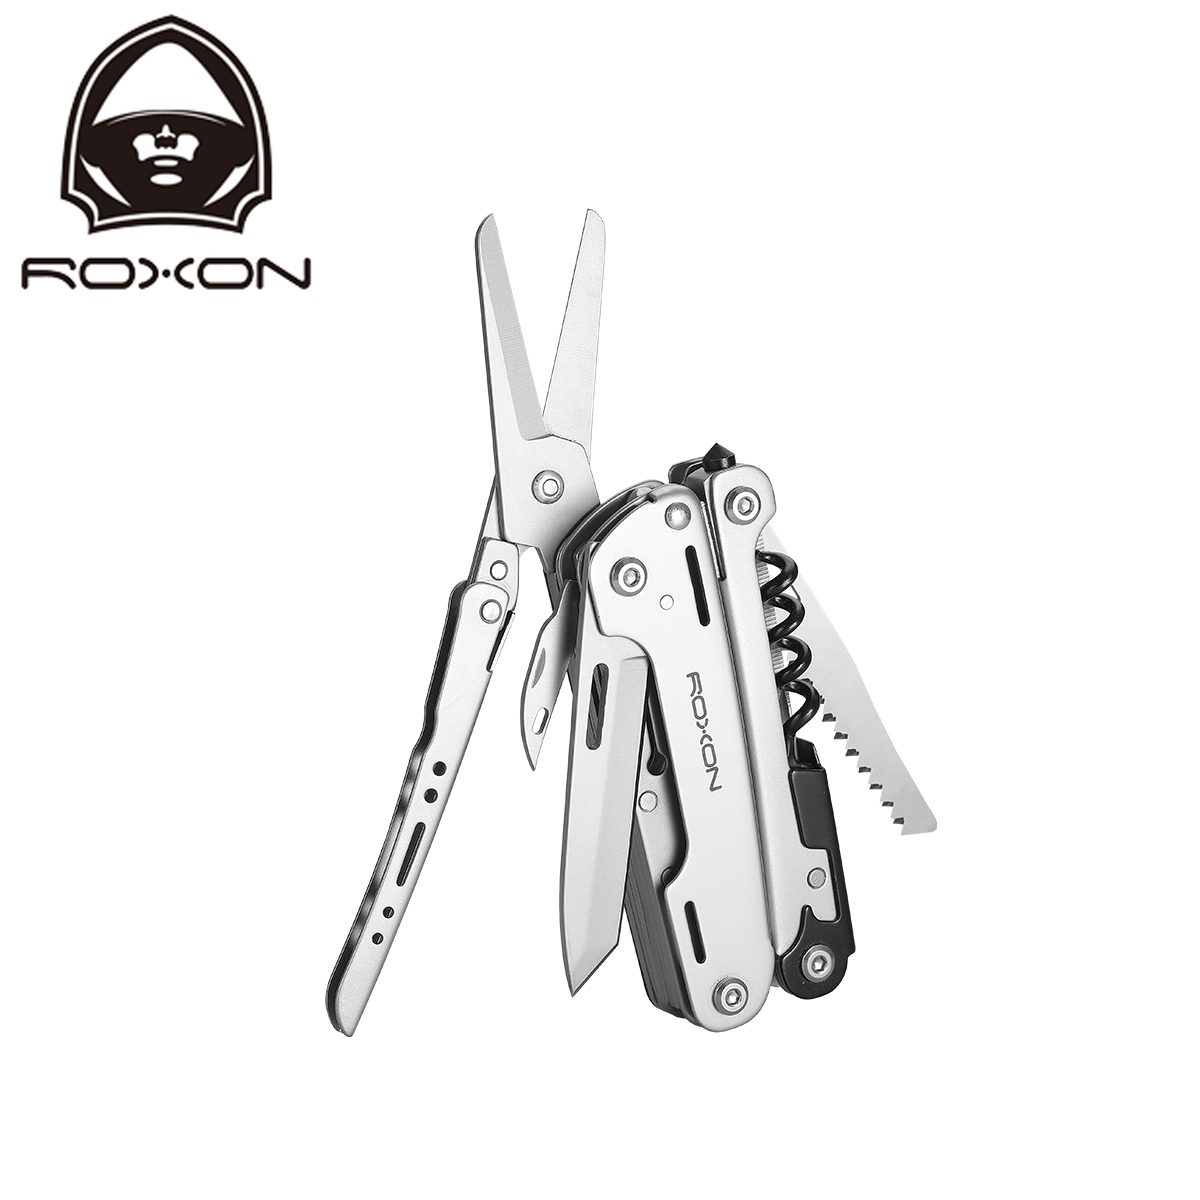 ROXON Storm 19-IN-1 Multi-Tool R-S801S - Northern Vic Ammo Supplies